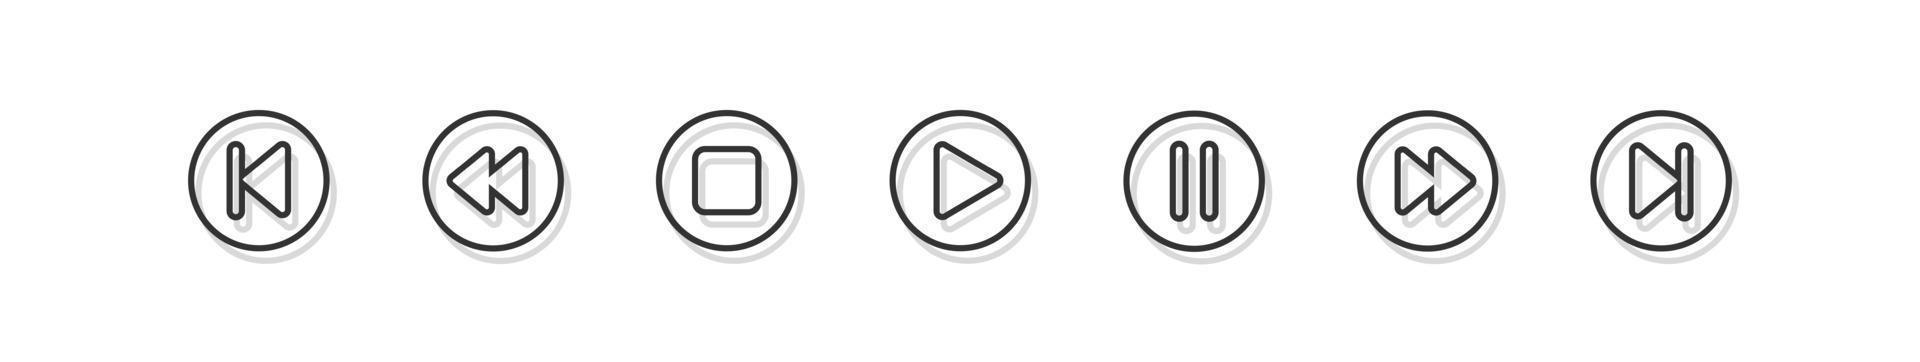 Video or audio player button symbol. Media player buttons icon set isolated on white background. Vector illustration.